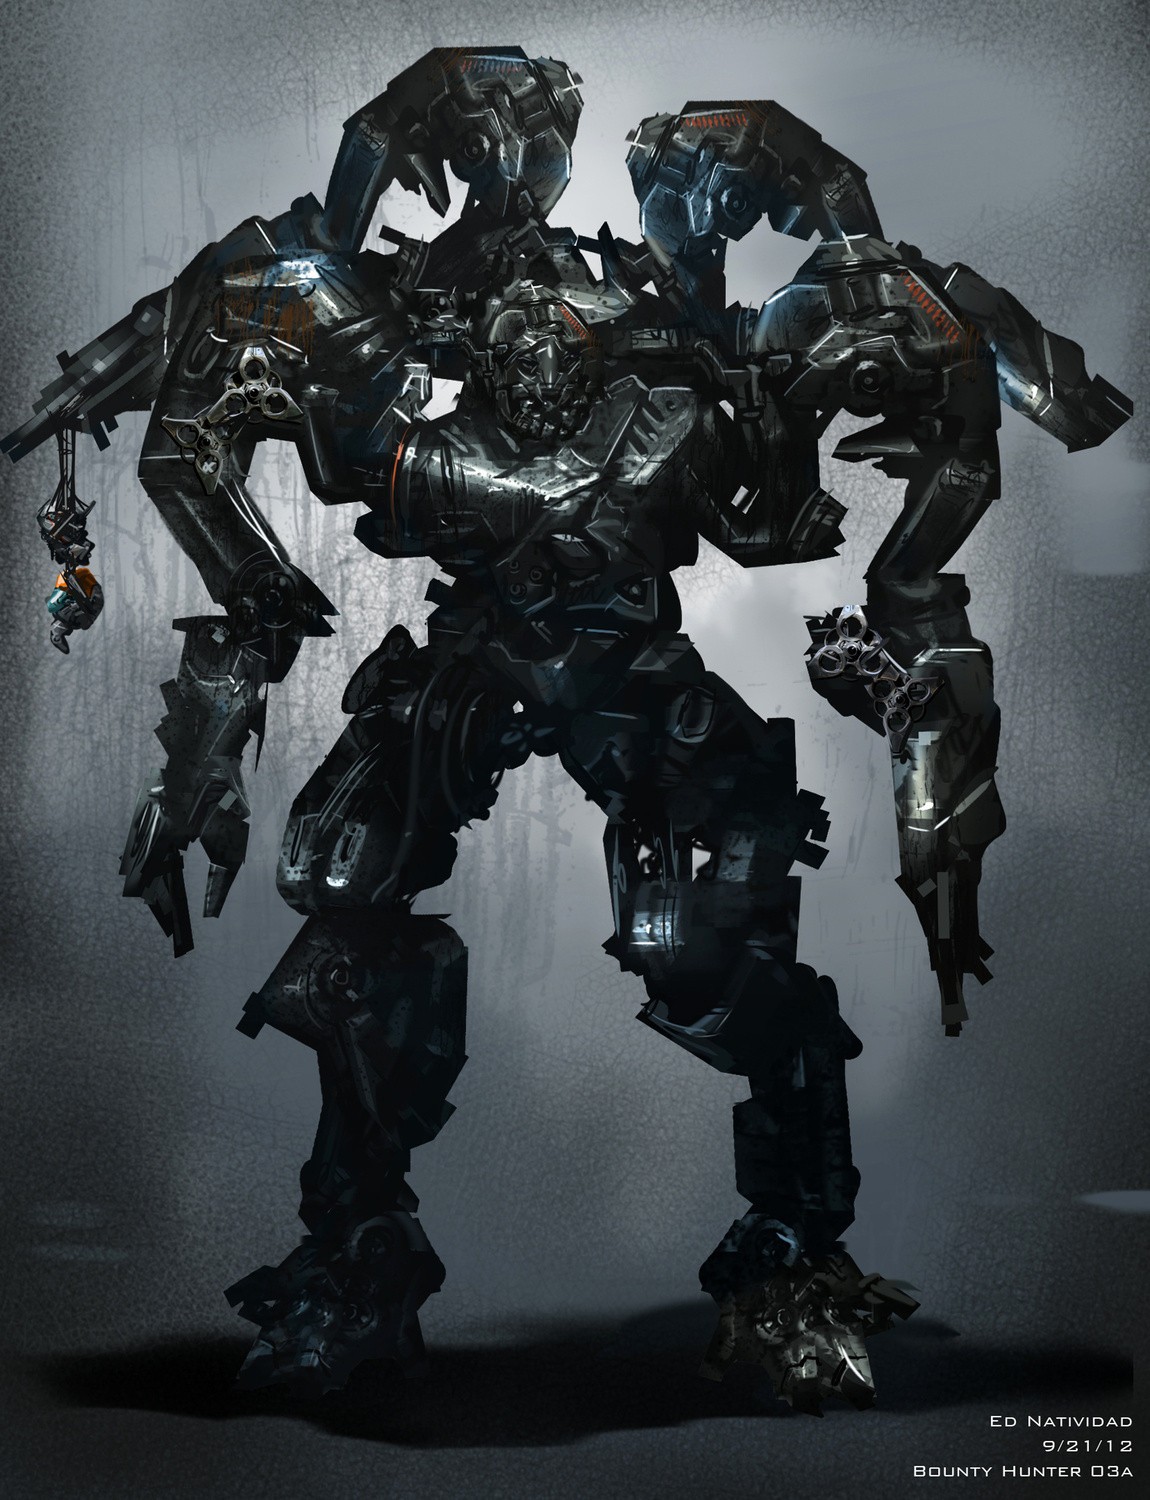 General 1150x1500 Transformers: Age of Extinction movies robot science fiction artwork